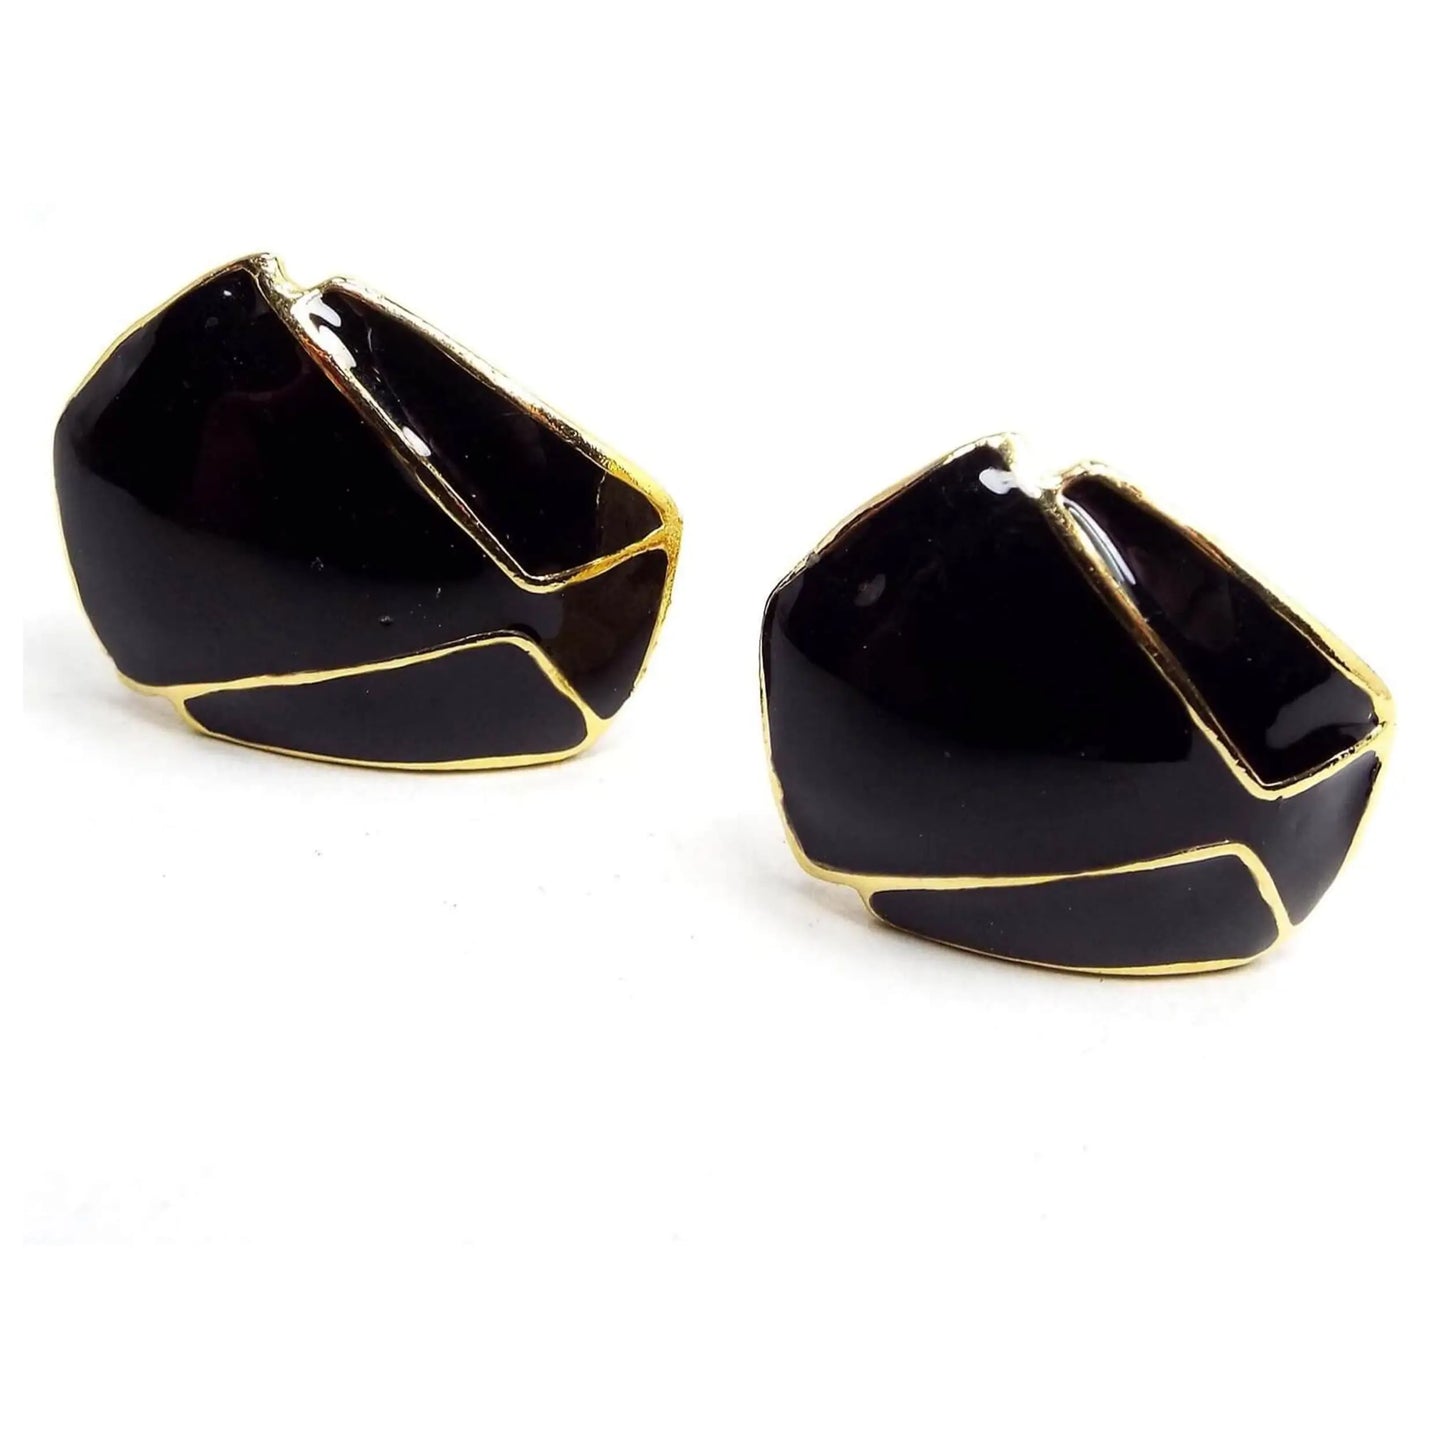 Angled front view of the retro vintage enameled earrings. The metal is gold tone in color and the enamel is black. The have a geometric style design/